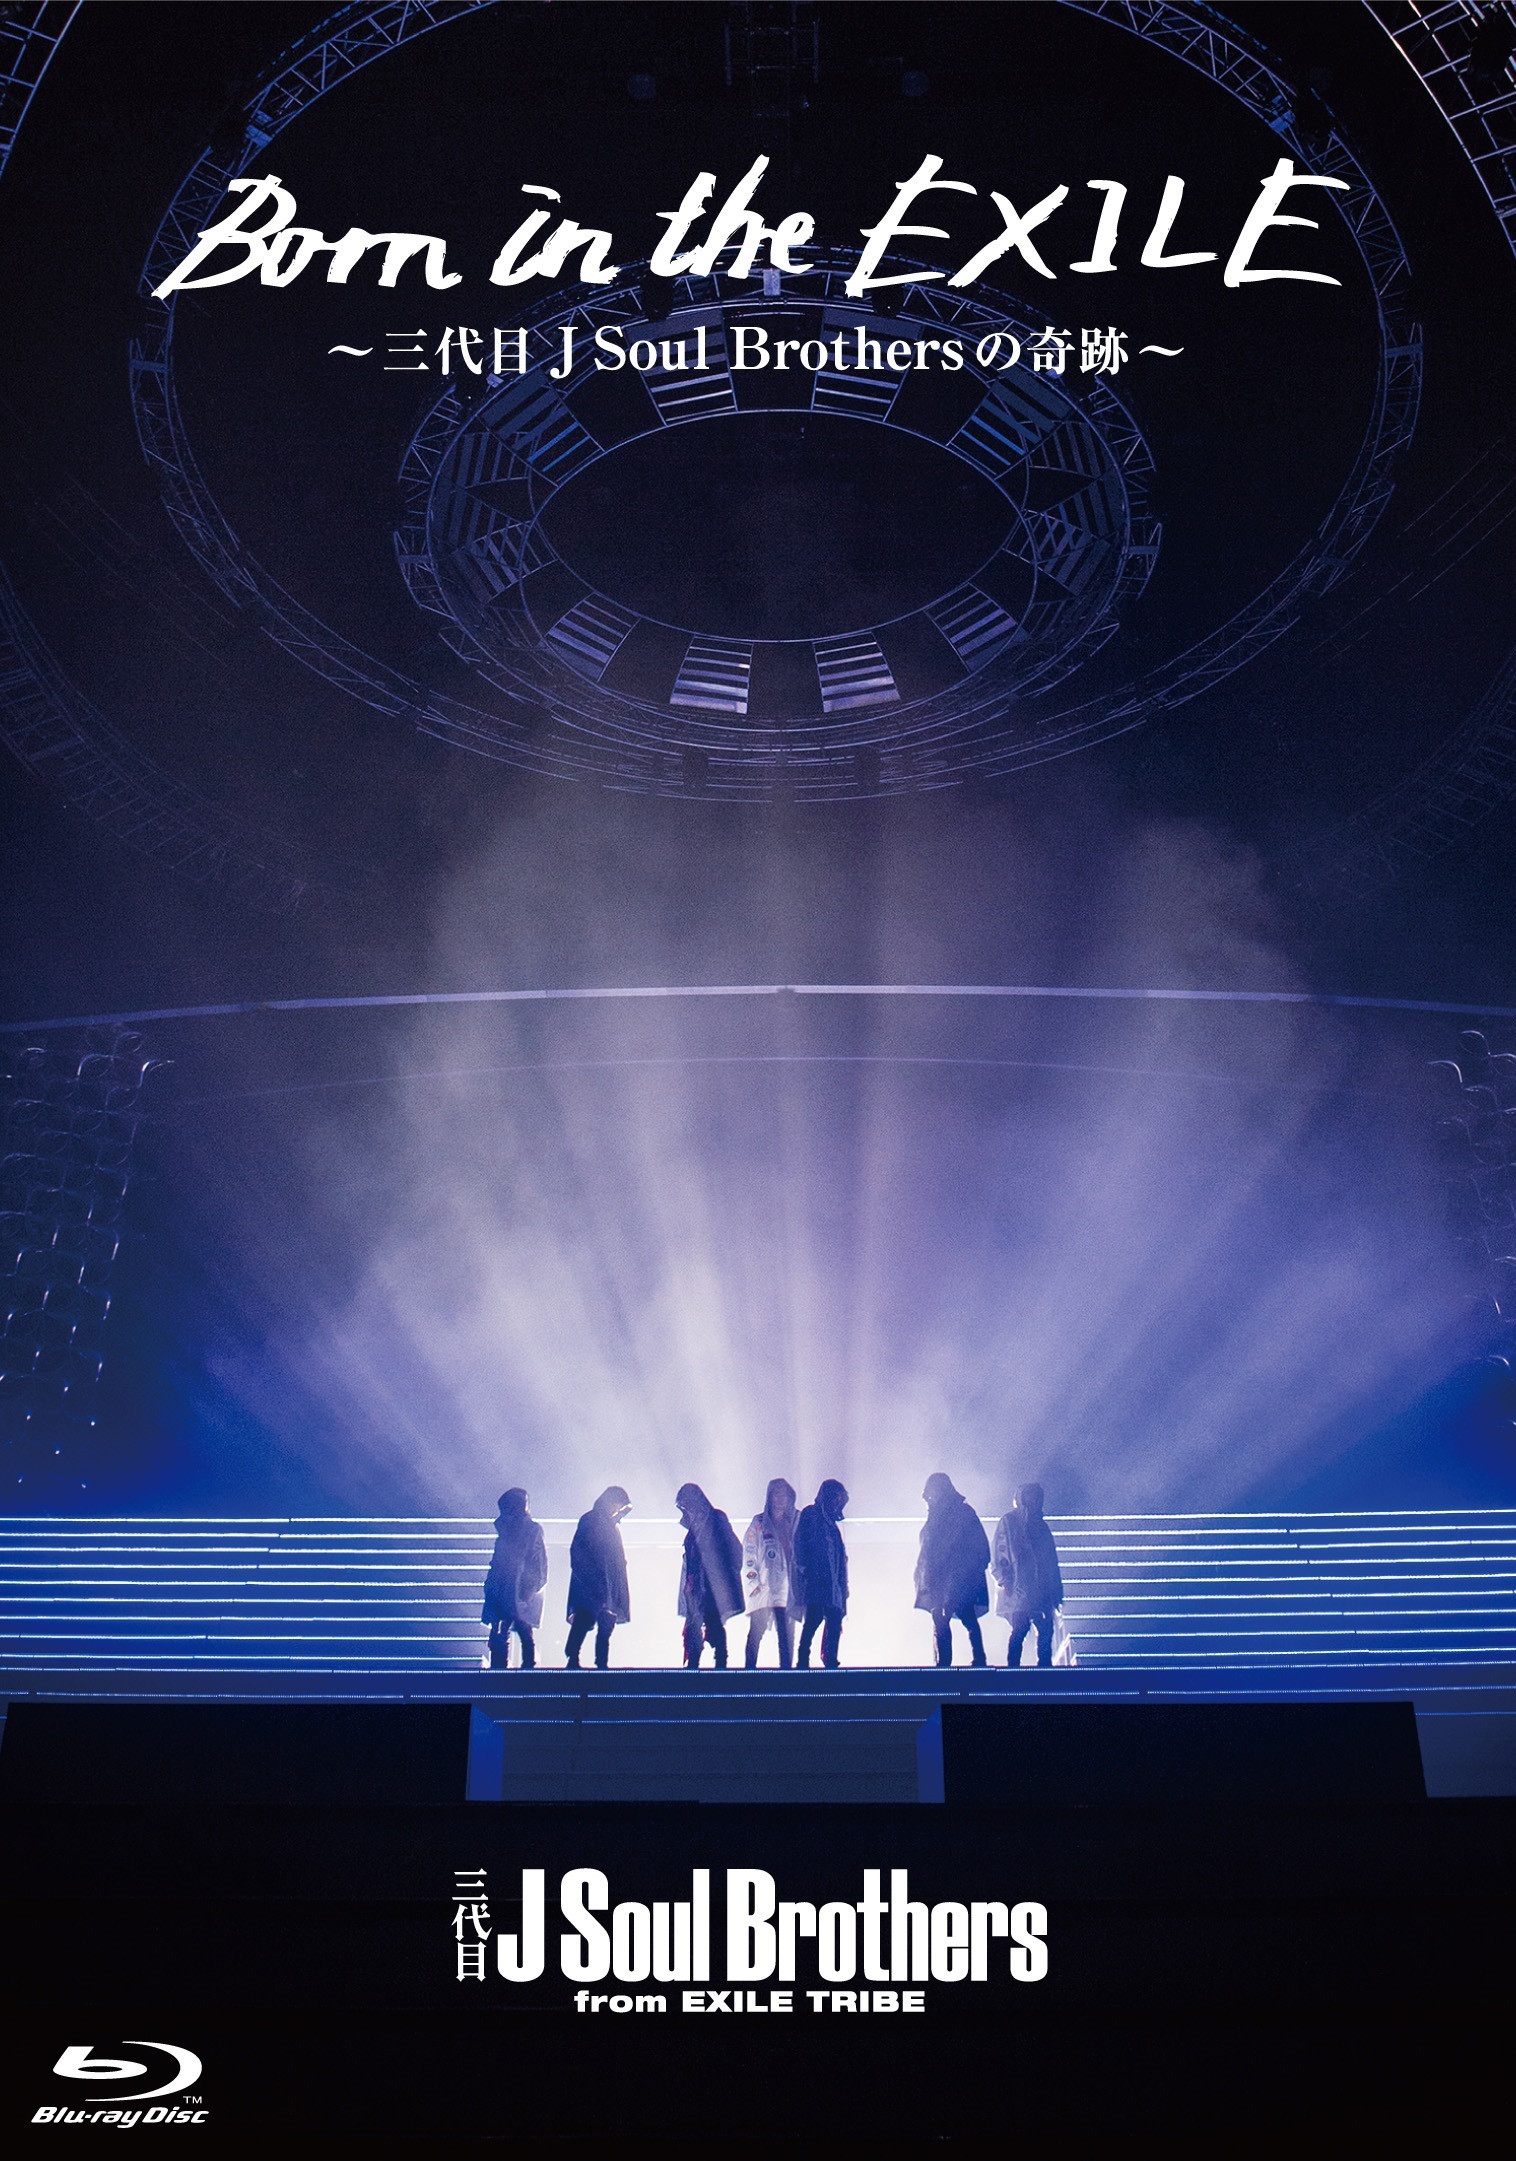 『Born in the EXILE ～三代目 J Soul Brothersの奇跡～』初回生産限定版Blu-ray